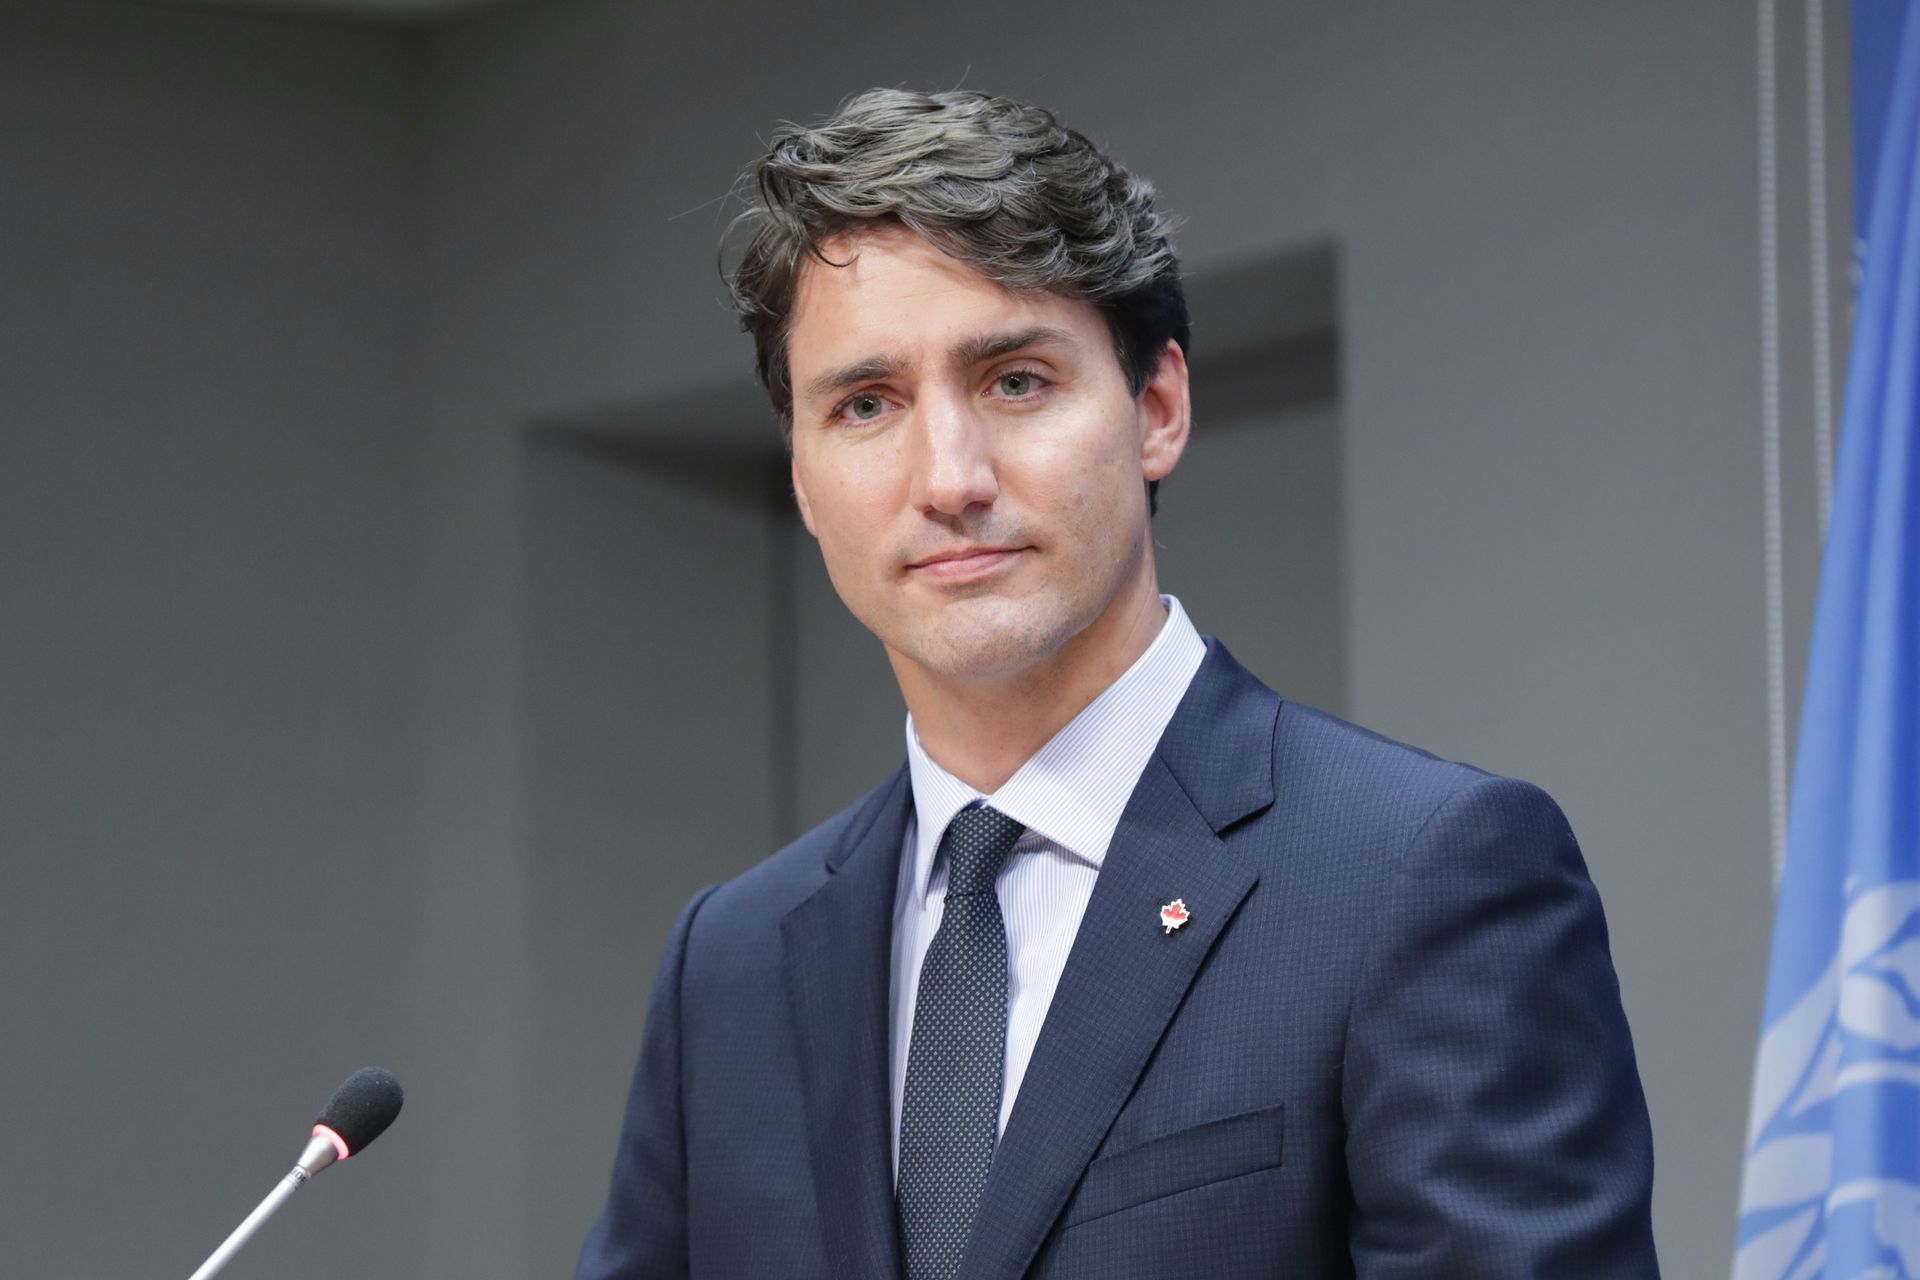 Will Trudeau sign off on a full renovation?